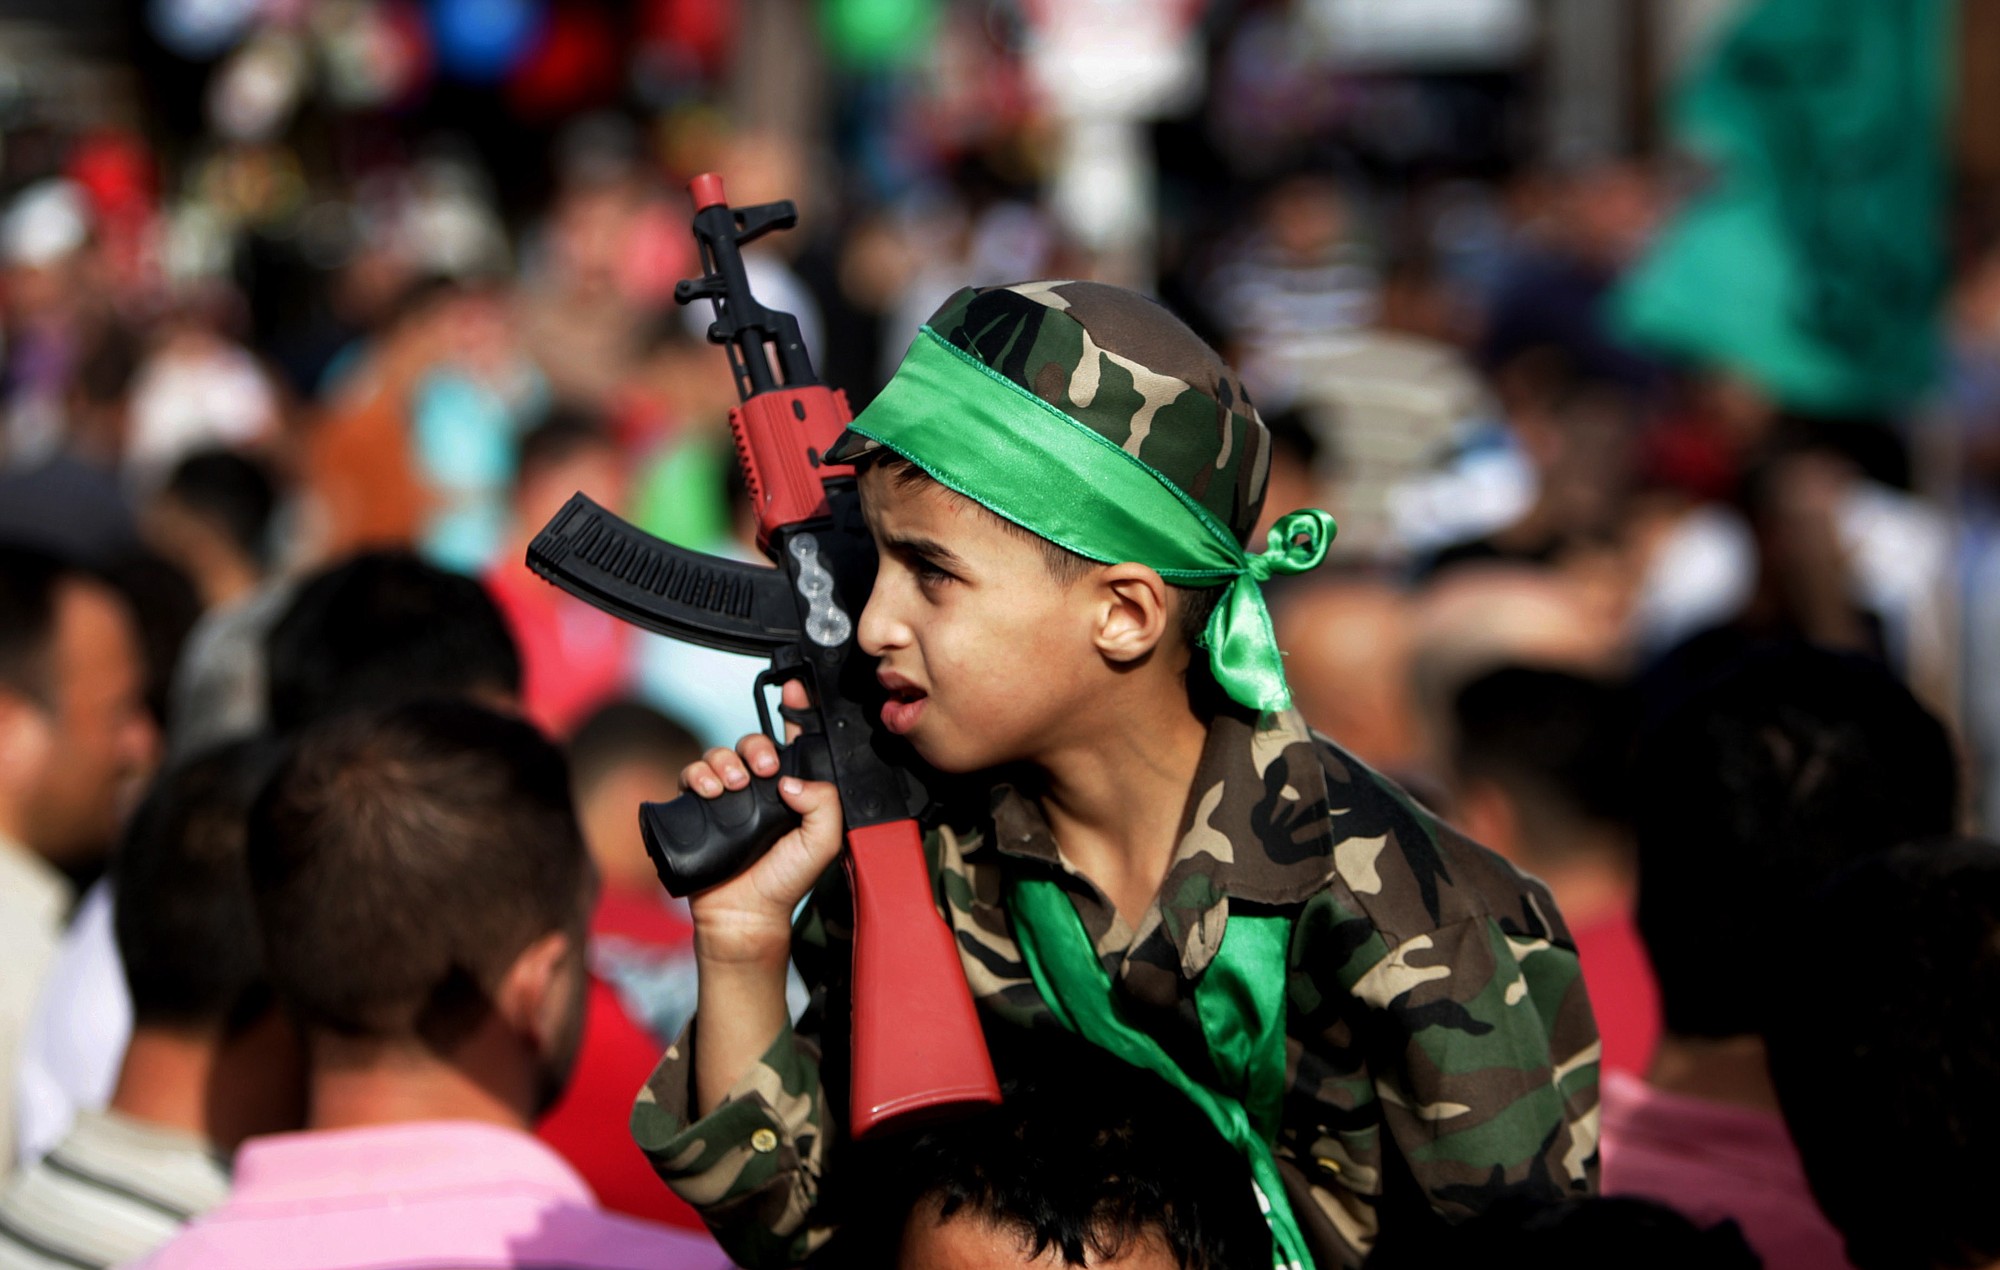 A boy holds a toy gun during a protest against the Gaza war in the West Bank city of Nablus on Monday.